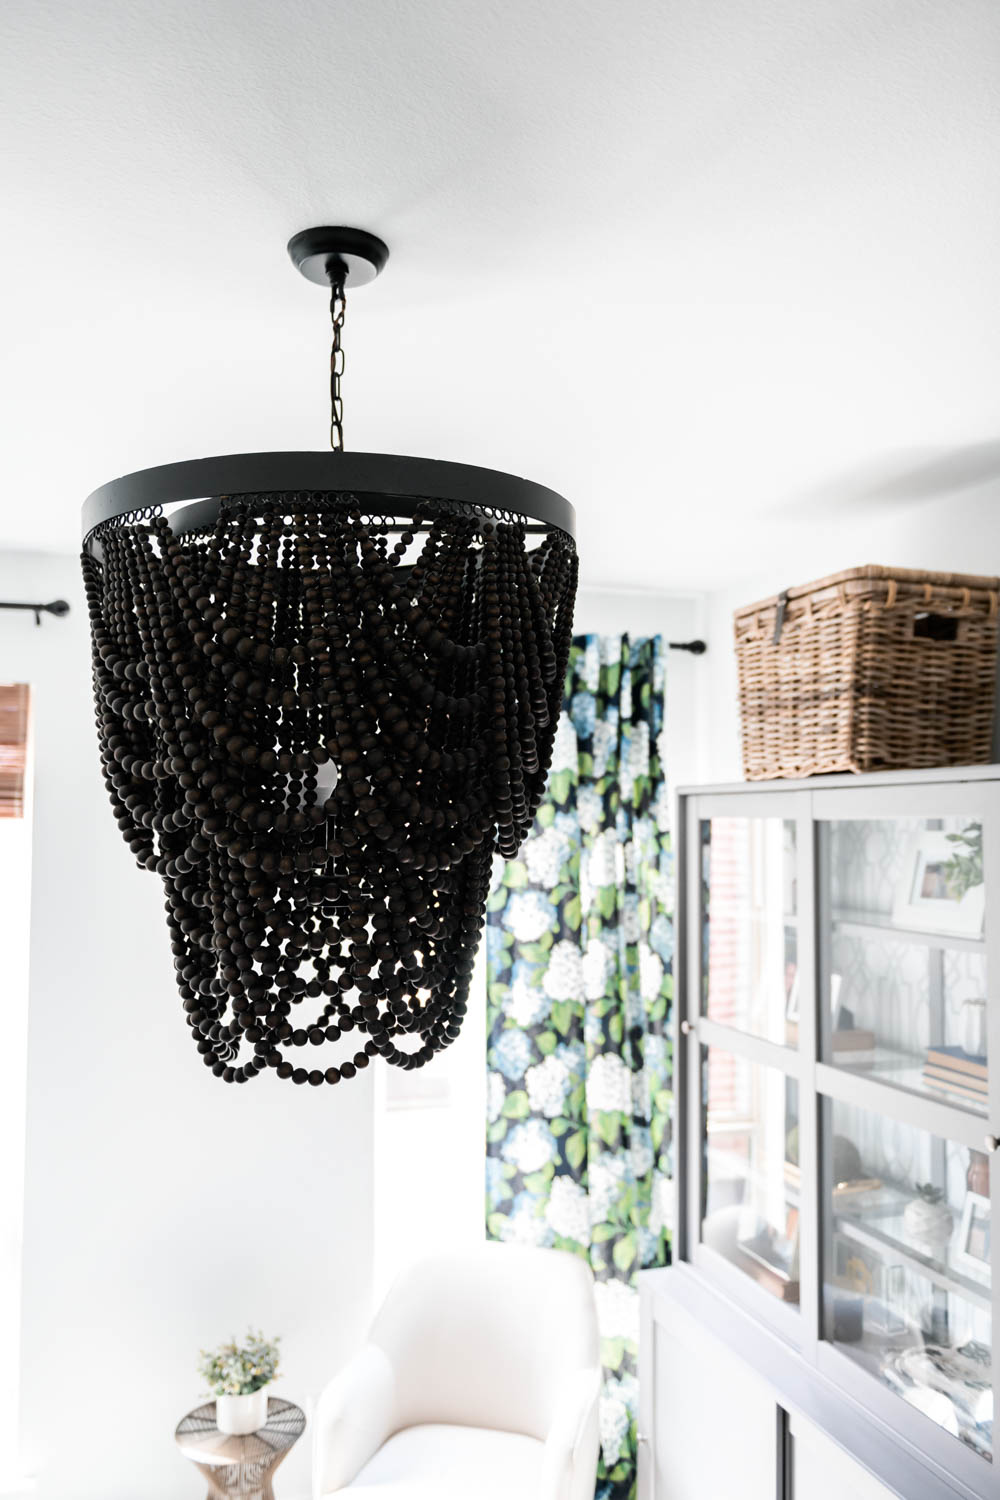 Black beaded chandelier makes a statement in this small space.